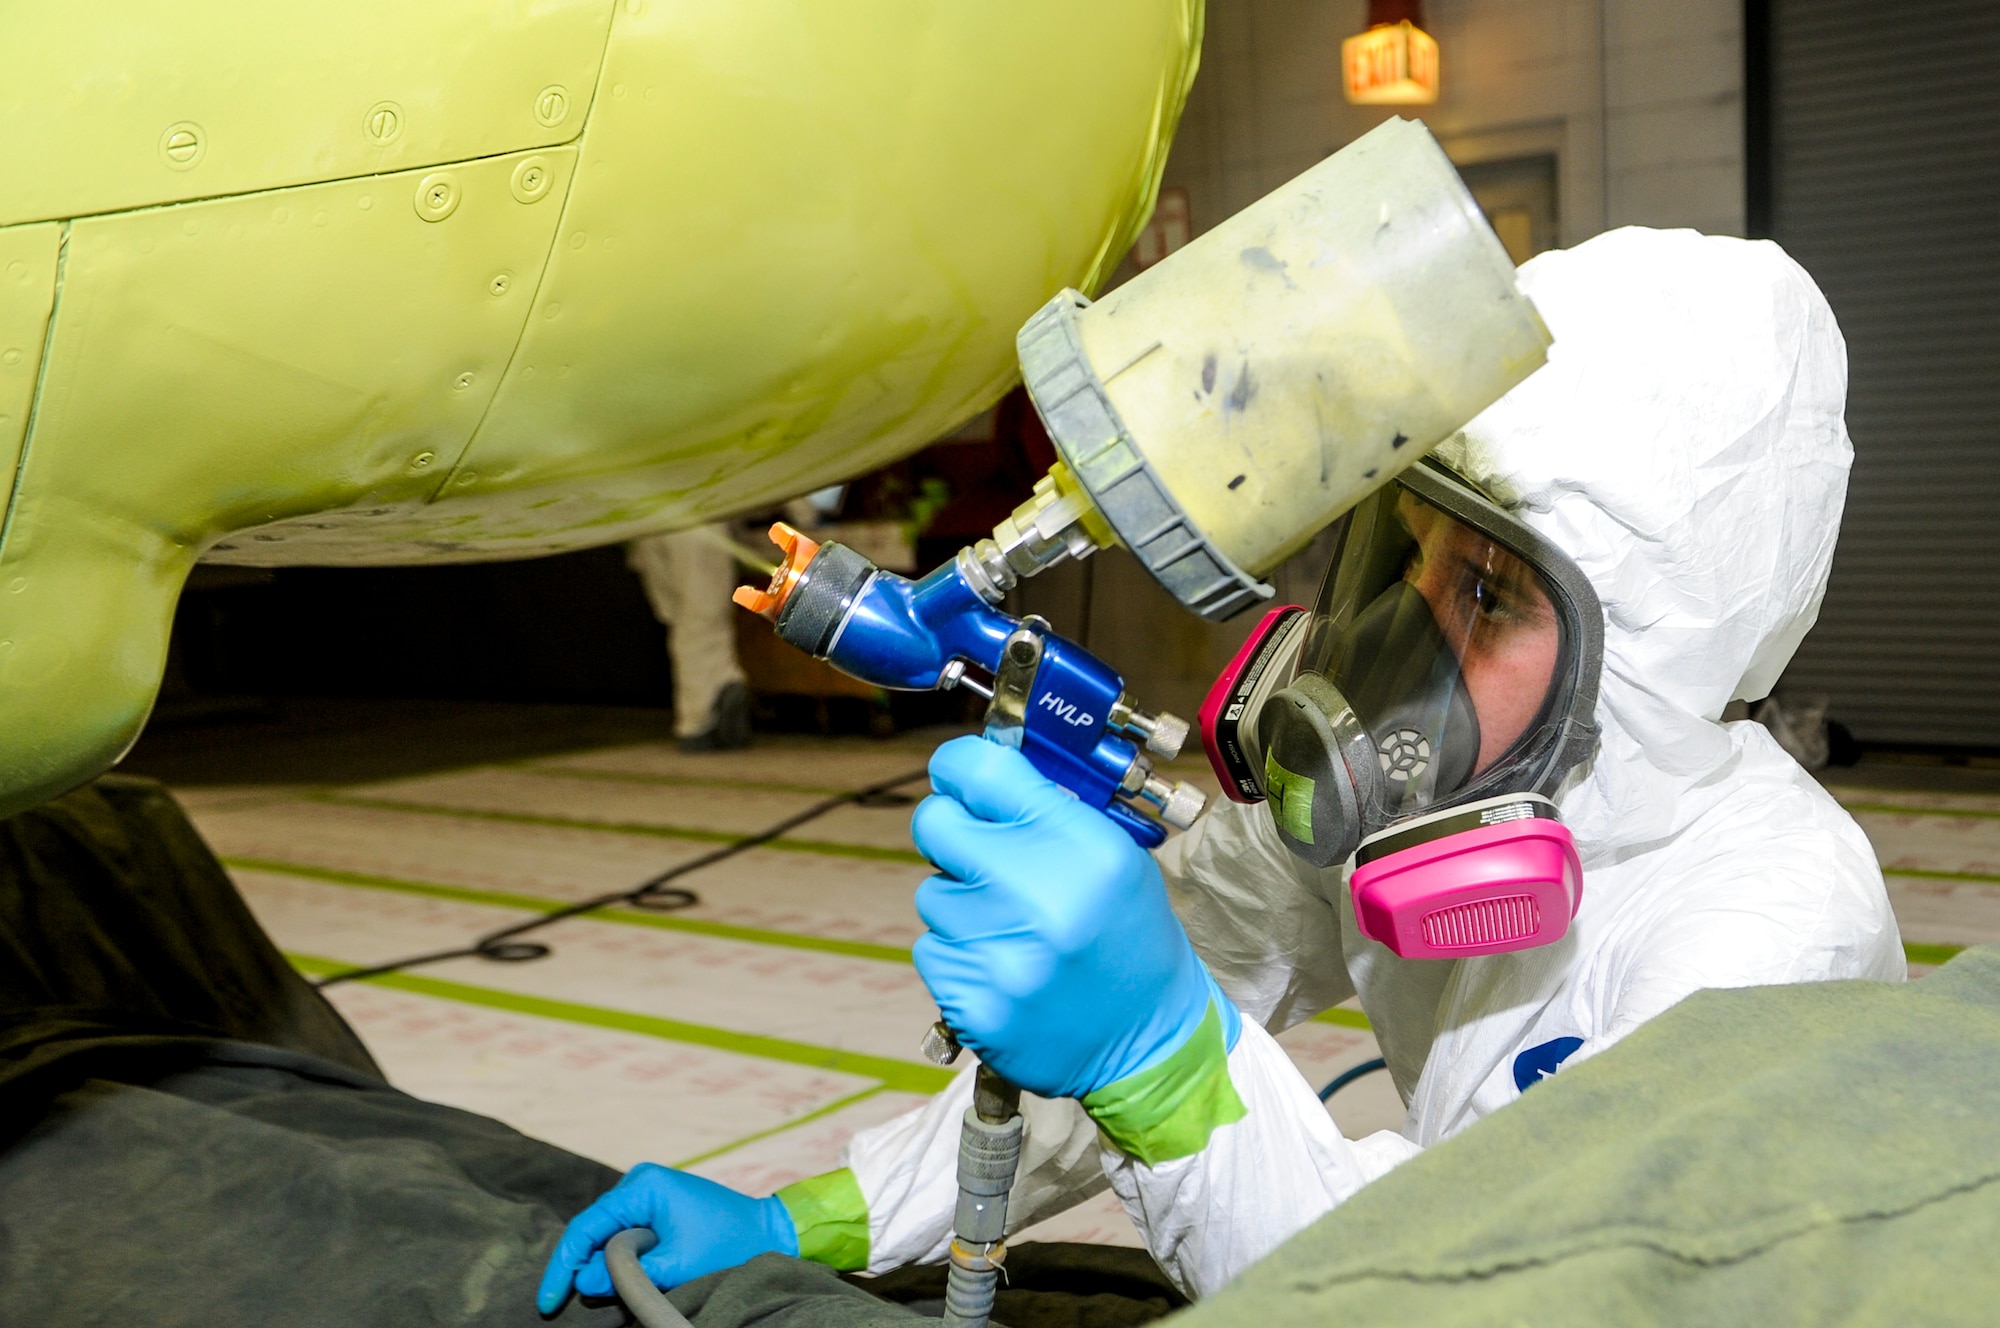 U.S. Air Force Senior Airman Patrick Hanrahan, aircraft structural maintainer from Fabrication Flight, 1st Special Operations Equipment Maintenance Squadron, uses a paint spray gun to add a coating of primer on a C-130 engine at the Corrosion Control Facility on Hurlburt Field, Fla., April 25, 2013. The 1 SOEMS is dedicated to providing the 1st Special Operations Wing with the best quality in maintenance and ensuring the wing can accomplish its mission any time, any place. (U.S. Air Force photo/Airman 1st Class Christopher Callaway)